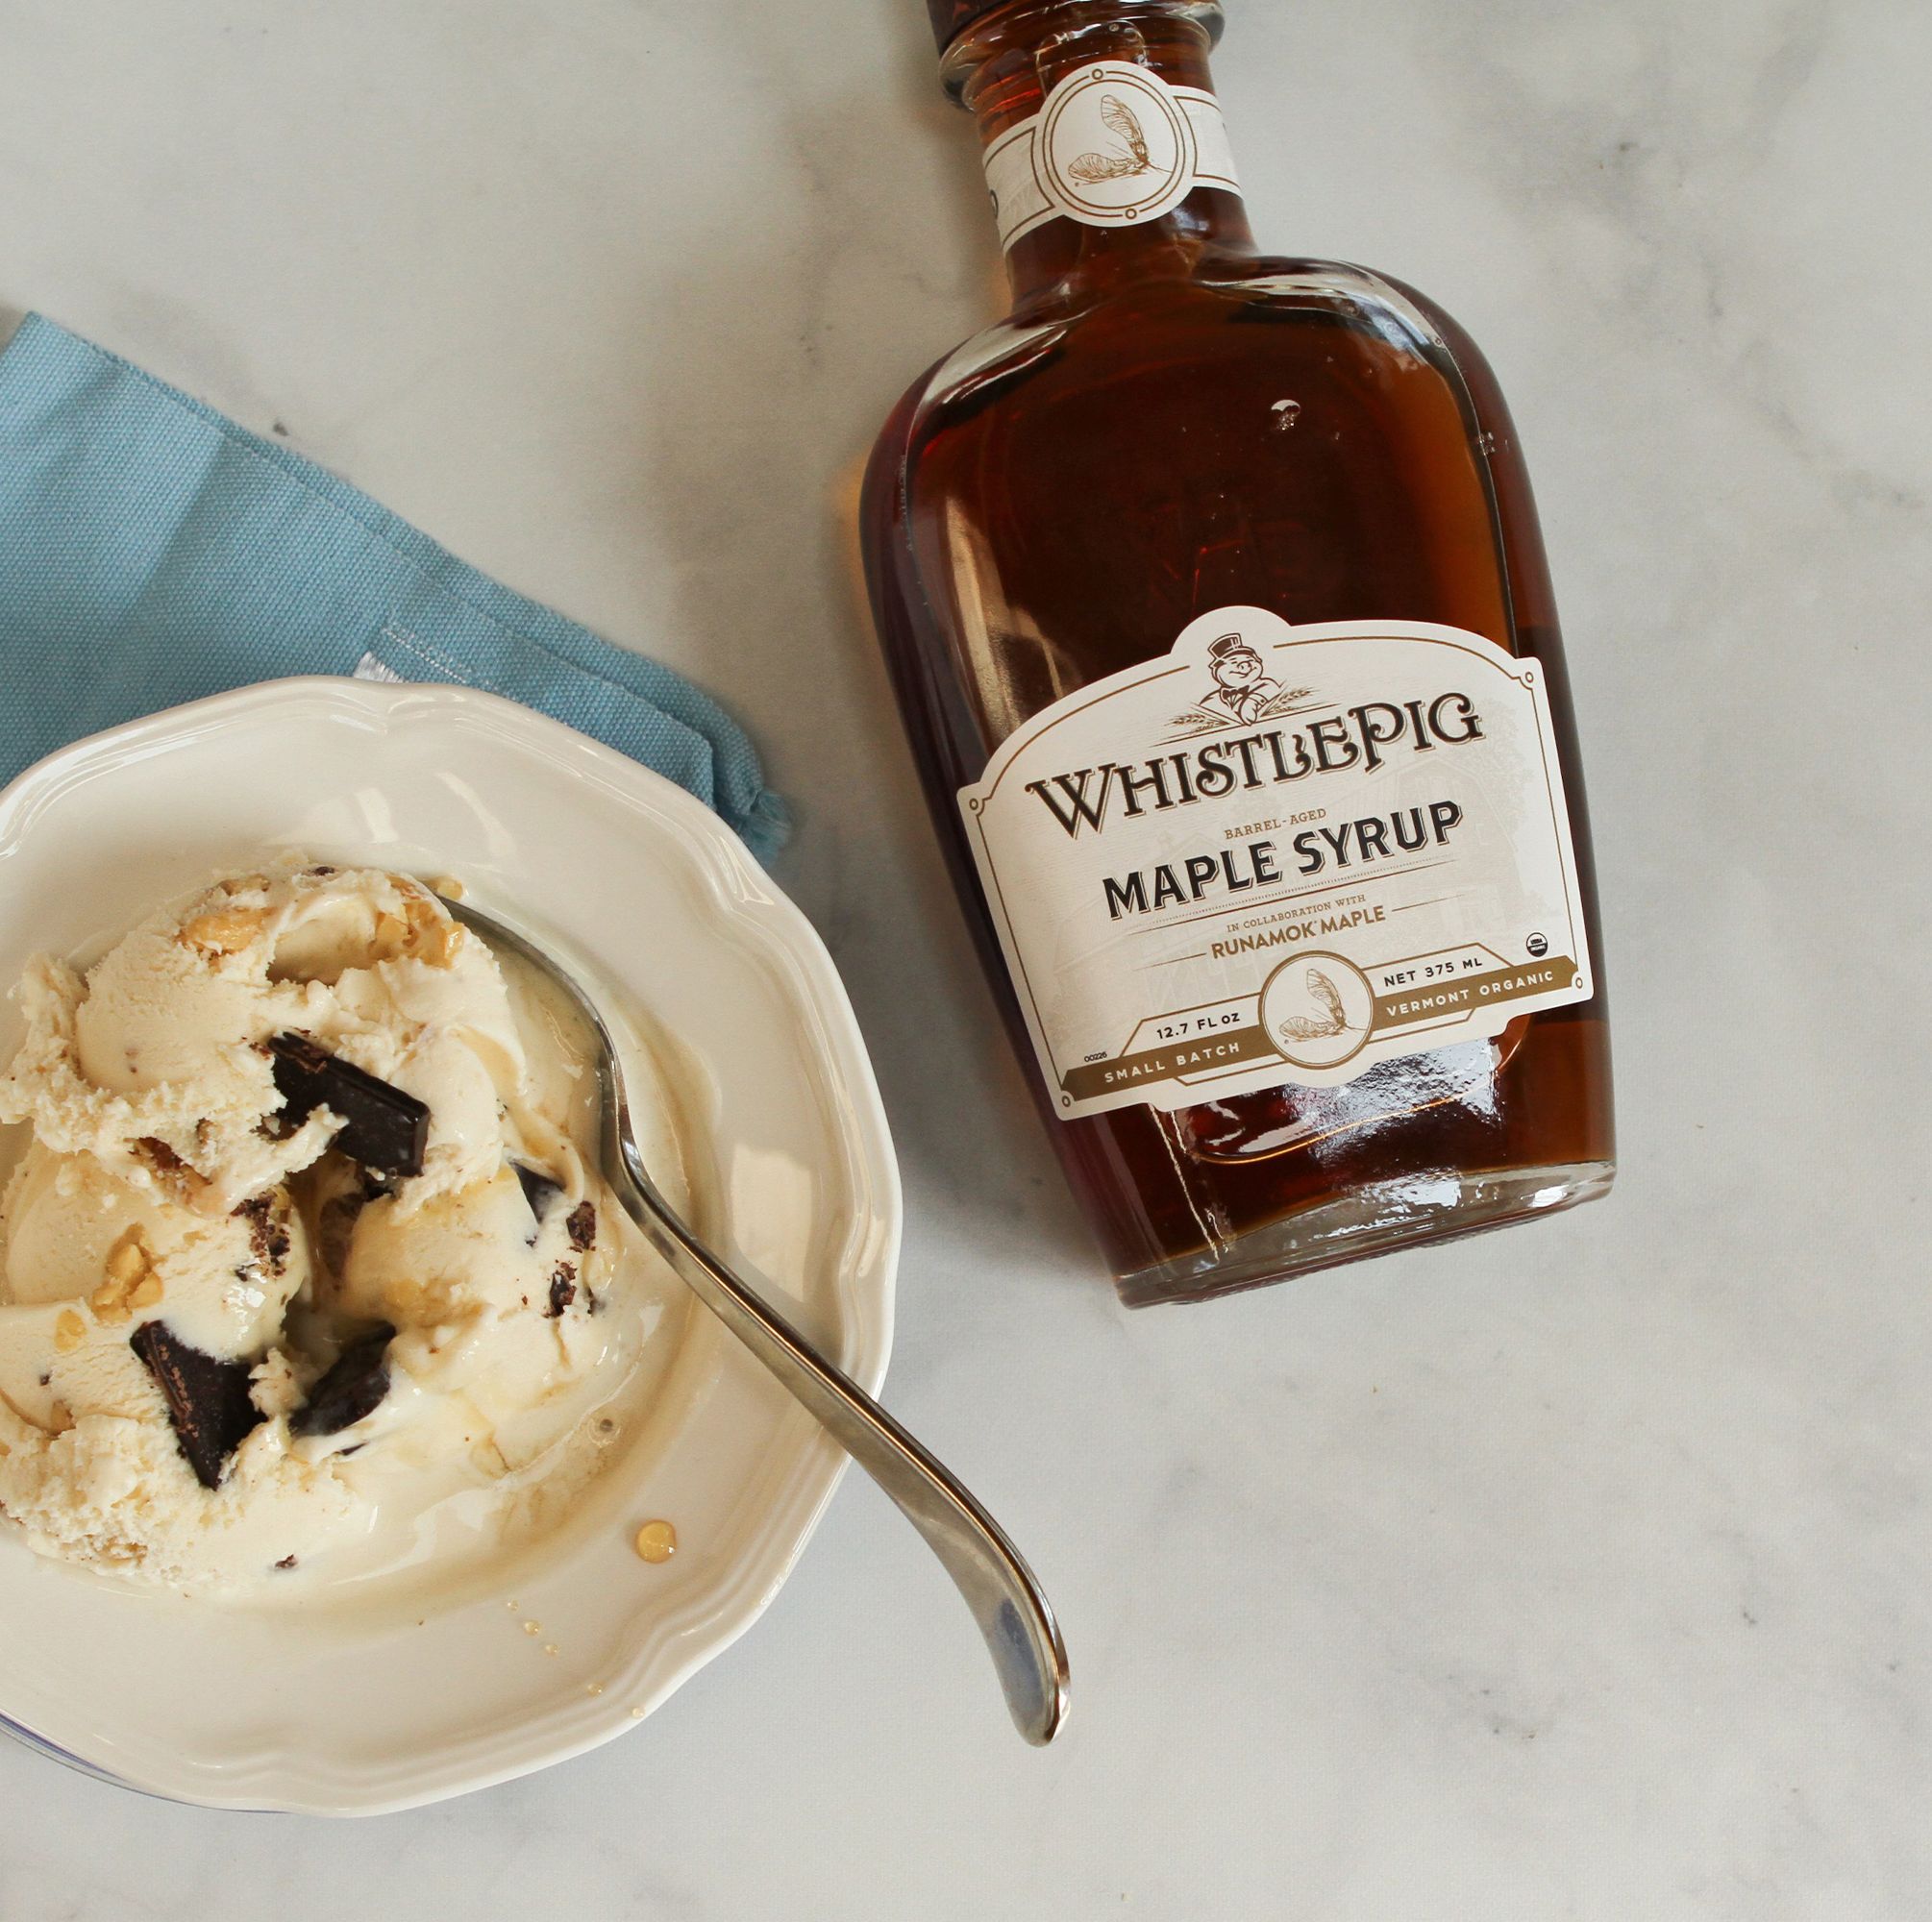 Get Your Hands on WhistlePig's Barrel-Aged Maple Syrup at Huckberry